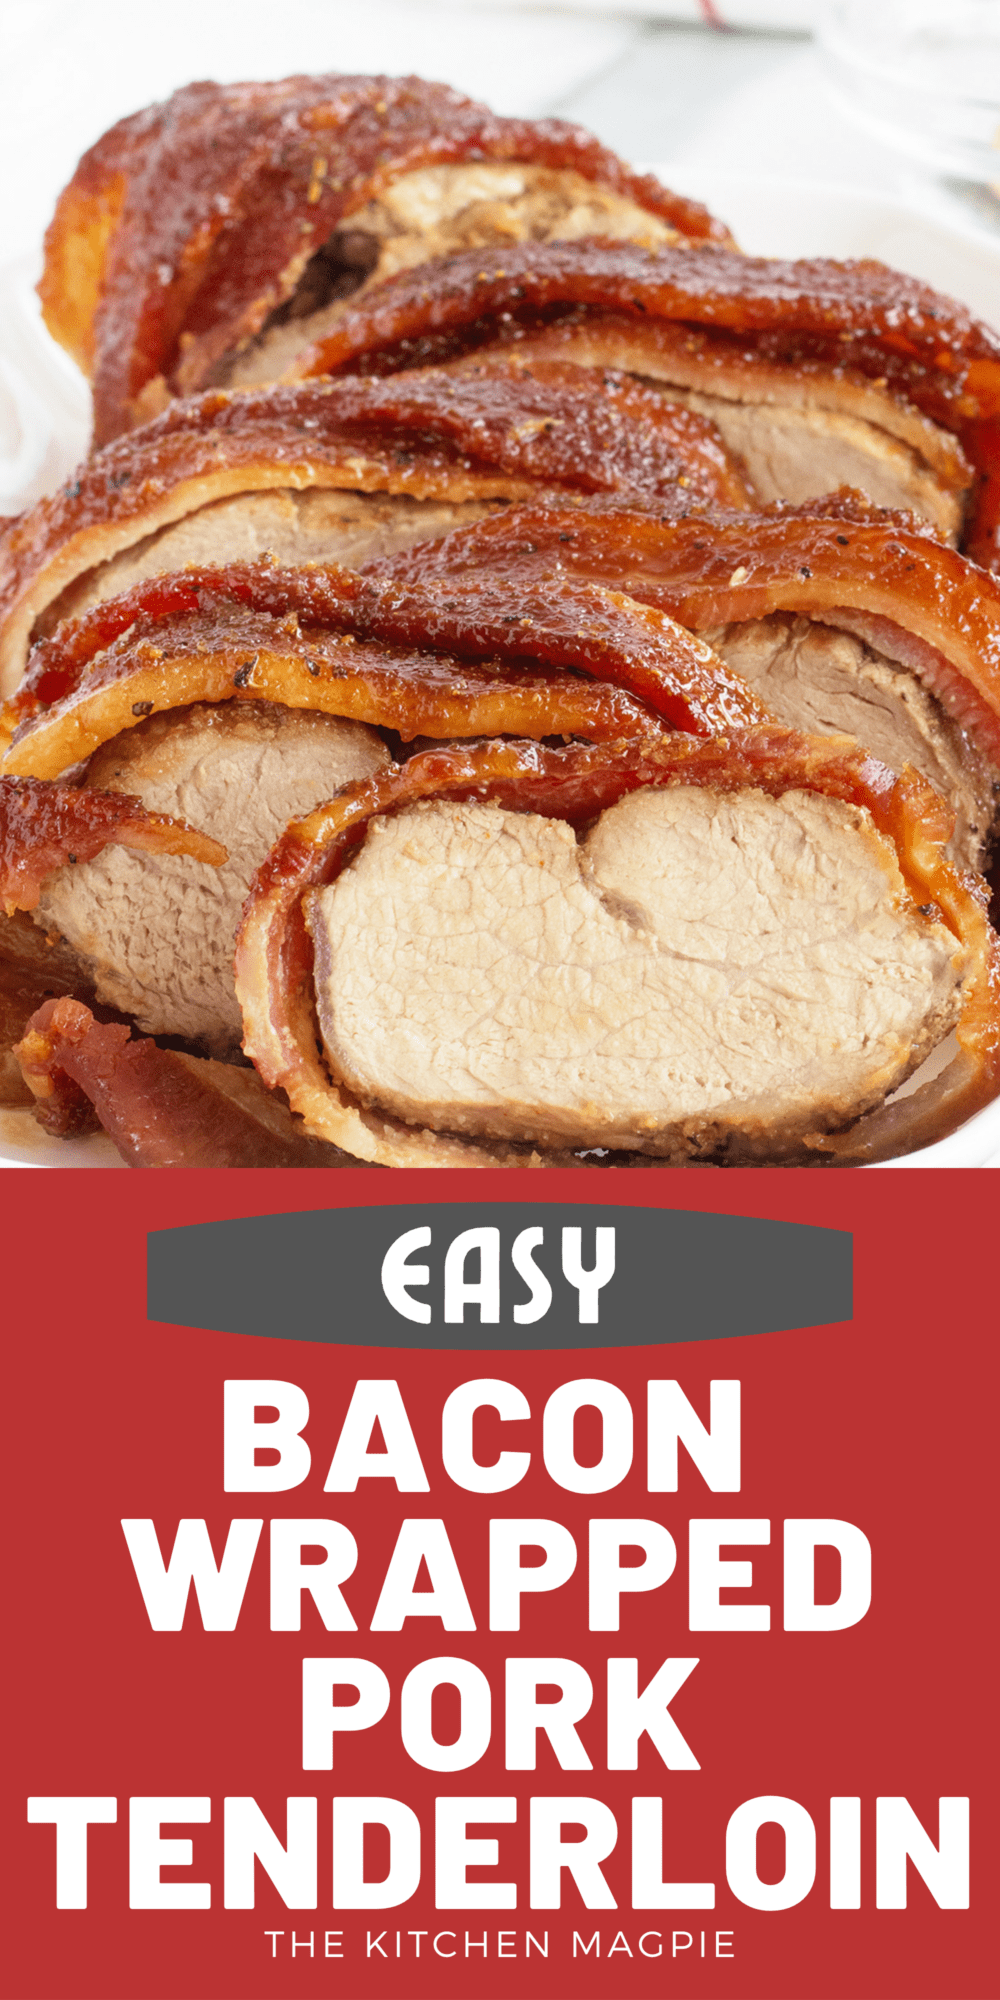 Pork tenderloin is wrapped in bacon, coated with an easy but delicious garlic brown sugar sauce then roasted to perfection, with bacon that's crispy on the outside and juicy pork tenderloin on the inside!